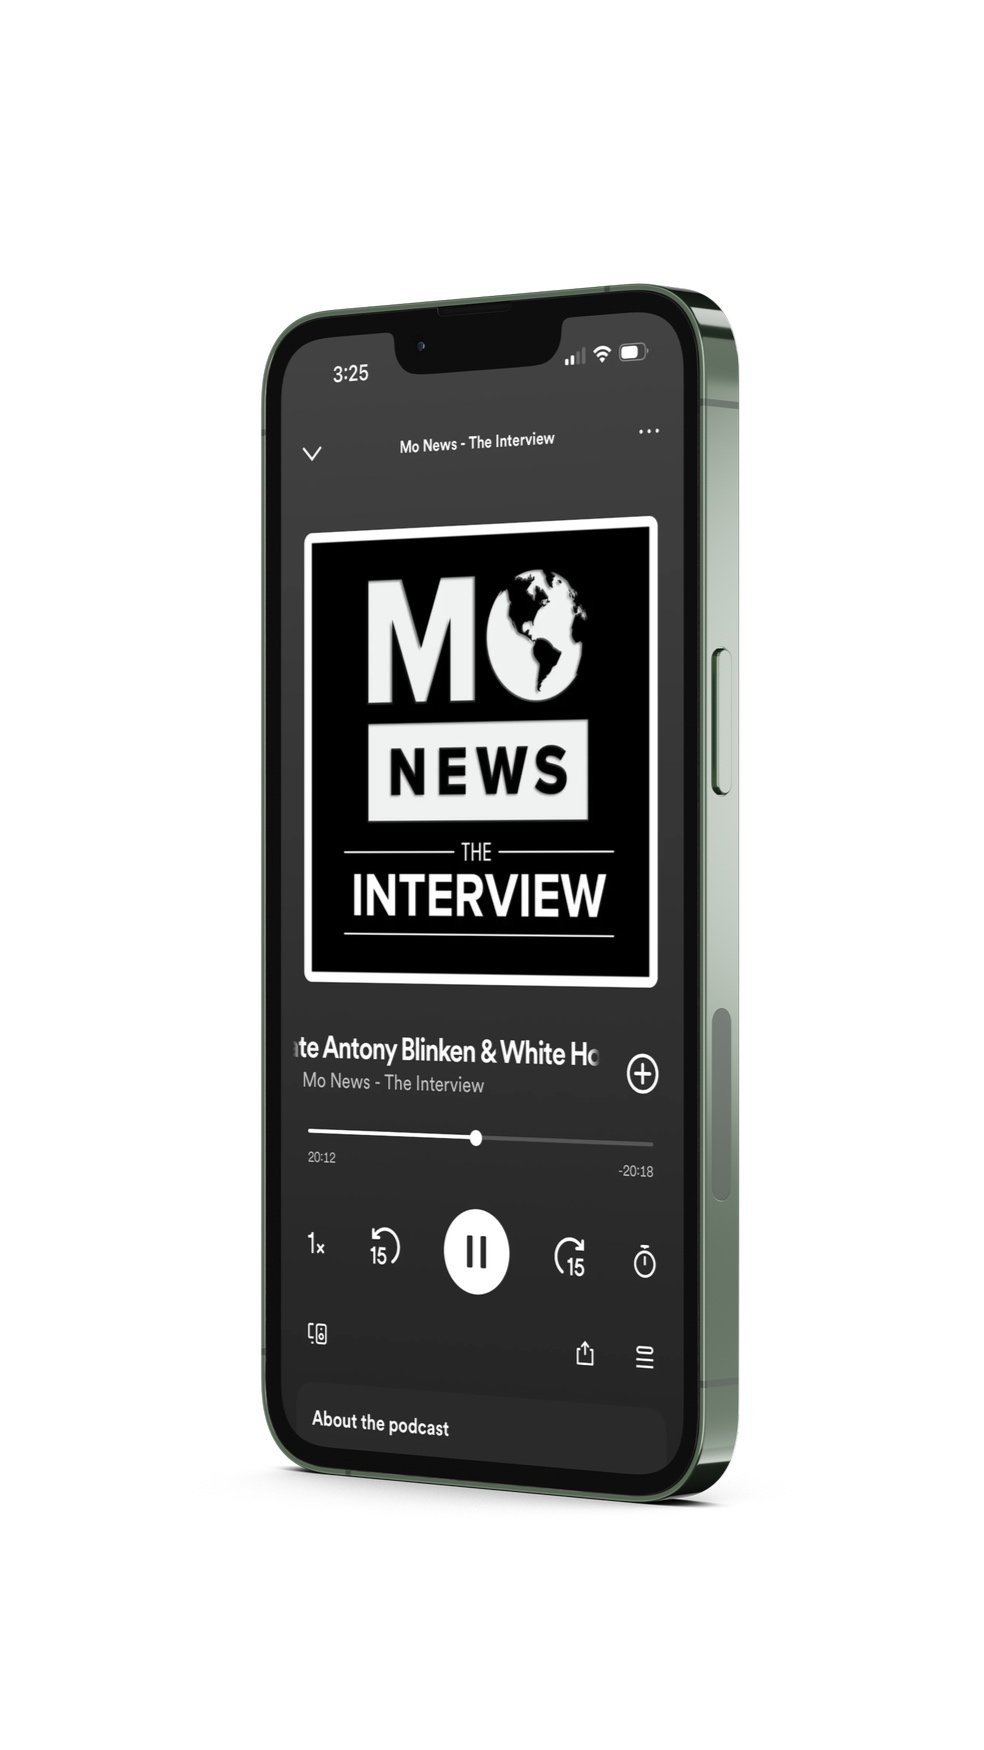 Mo News: The Interview Podcast